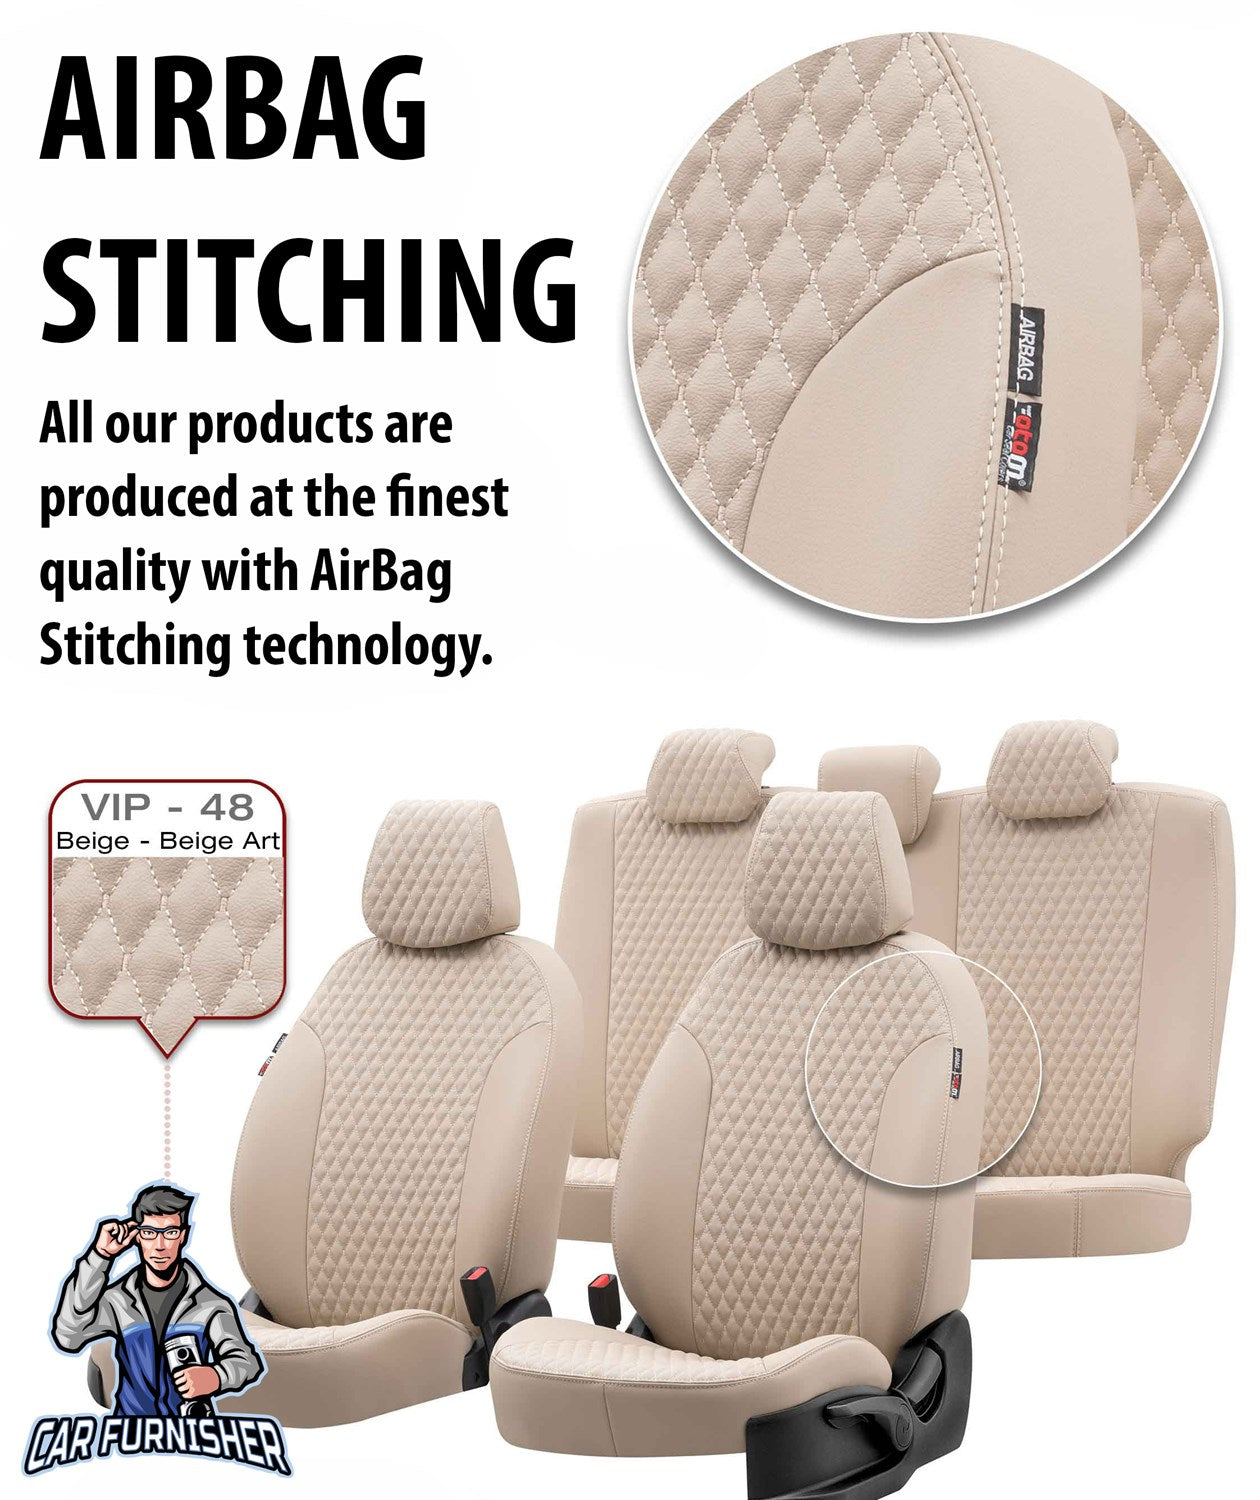 Audi Q2 Seat Cover Amsterdam Leather Design Ivory Leather